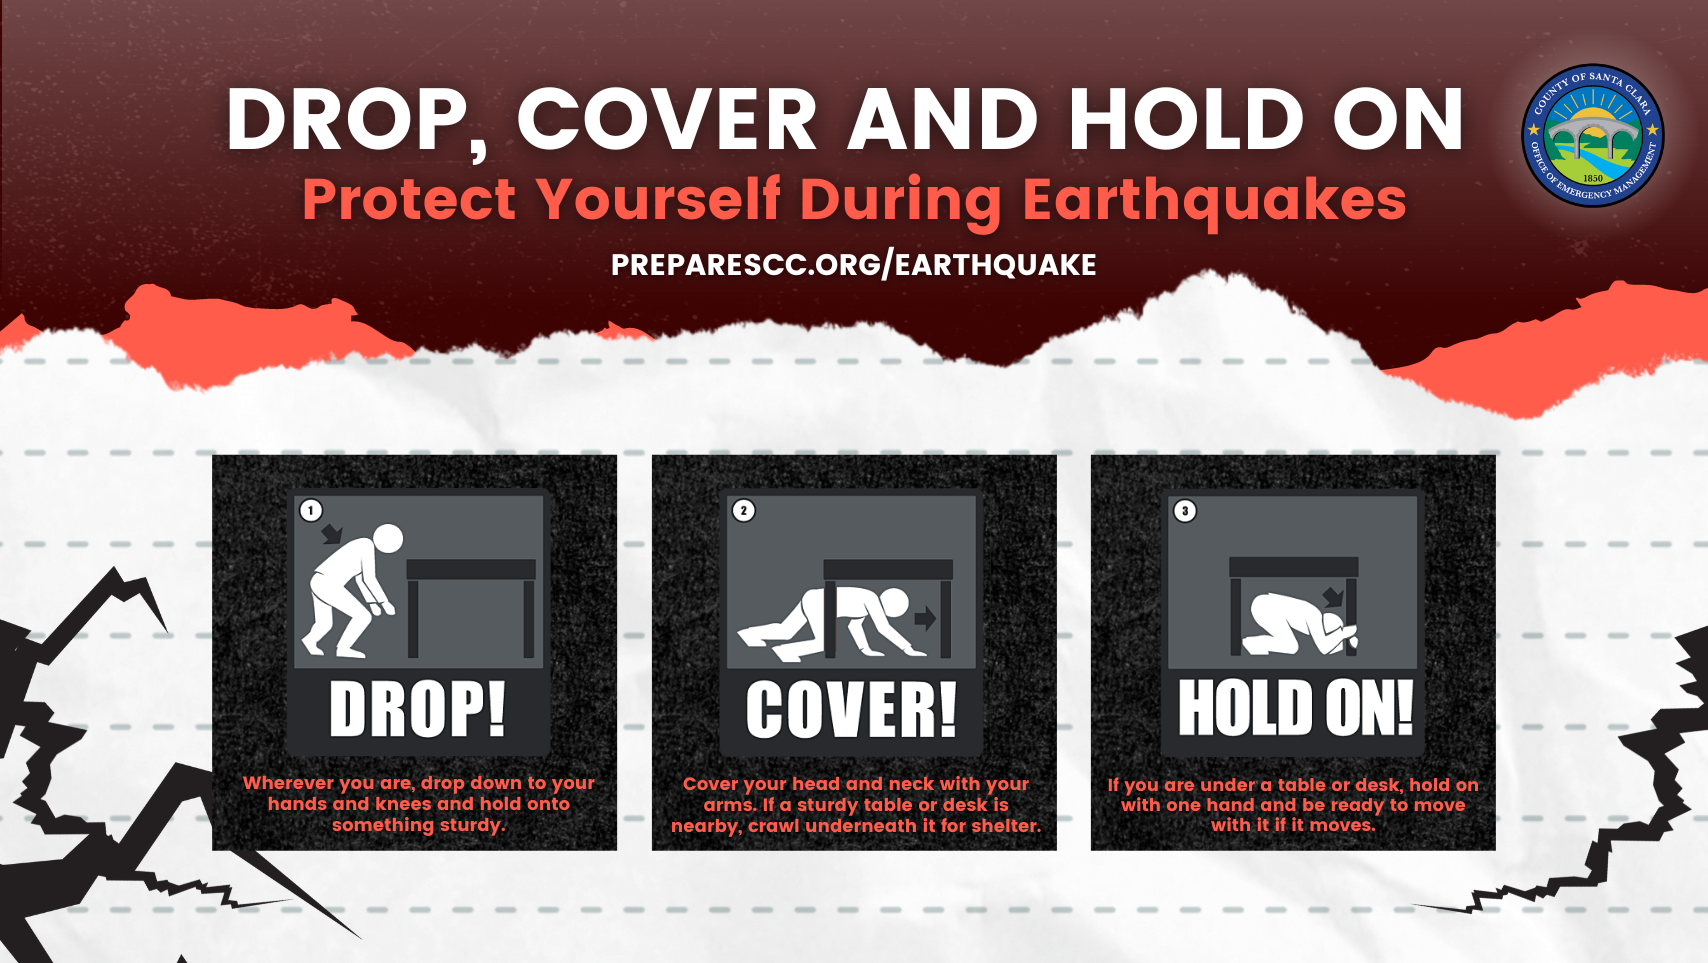 Drop, Cover and Hold On. Protect Yourself During Earthquakes